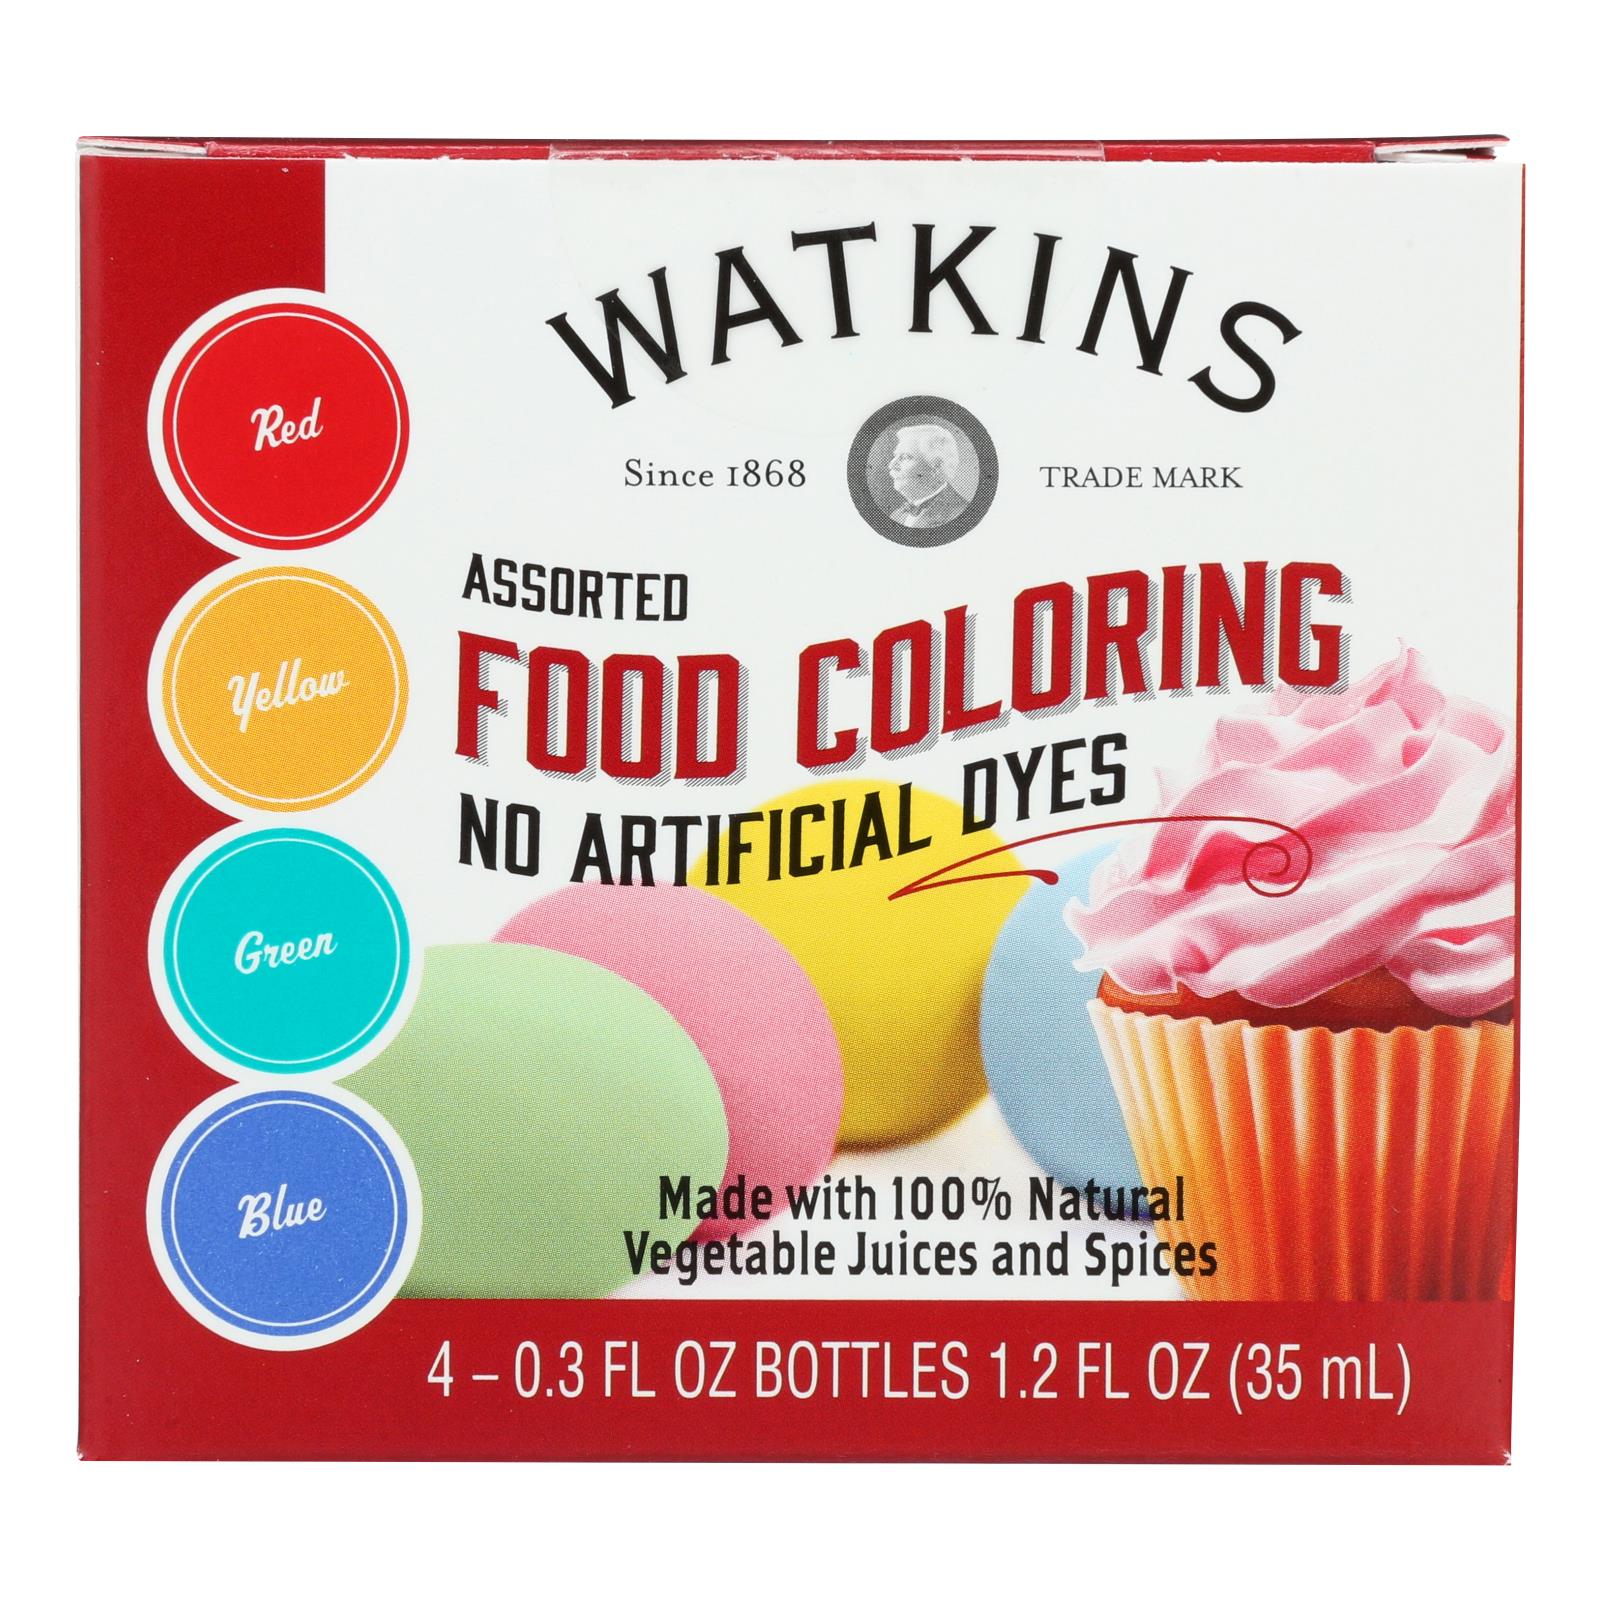 J.R. Watkins Food Coloring - Assorted - Case of 6 - 4 Count